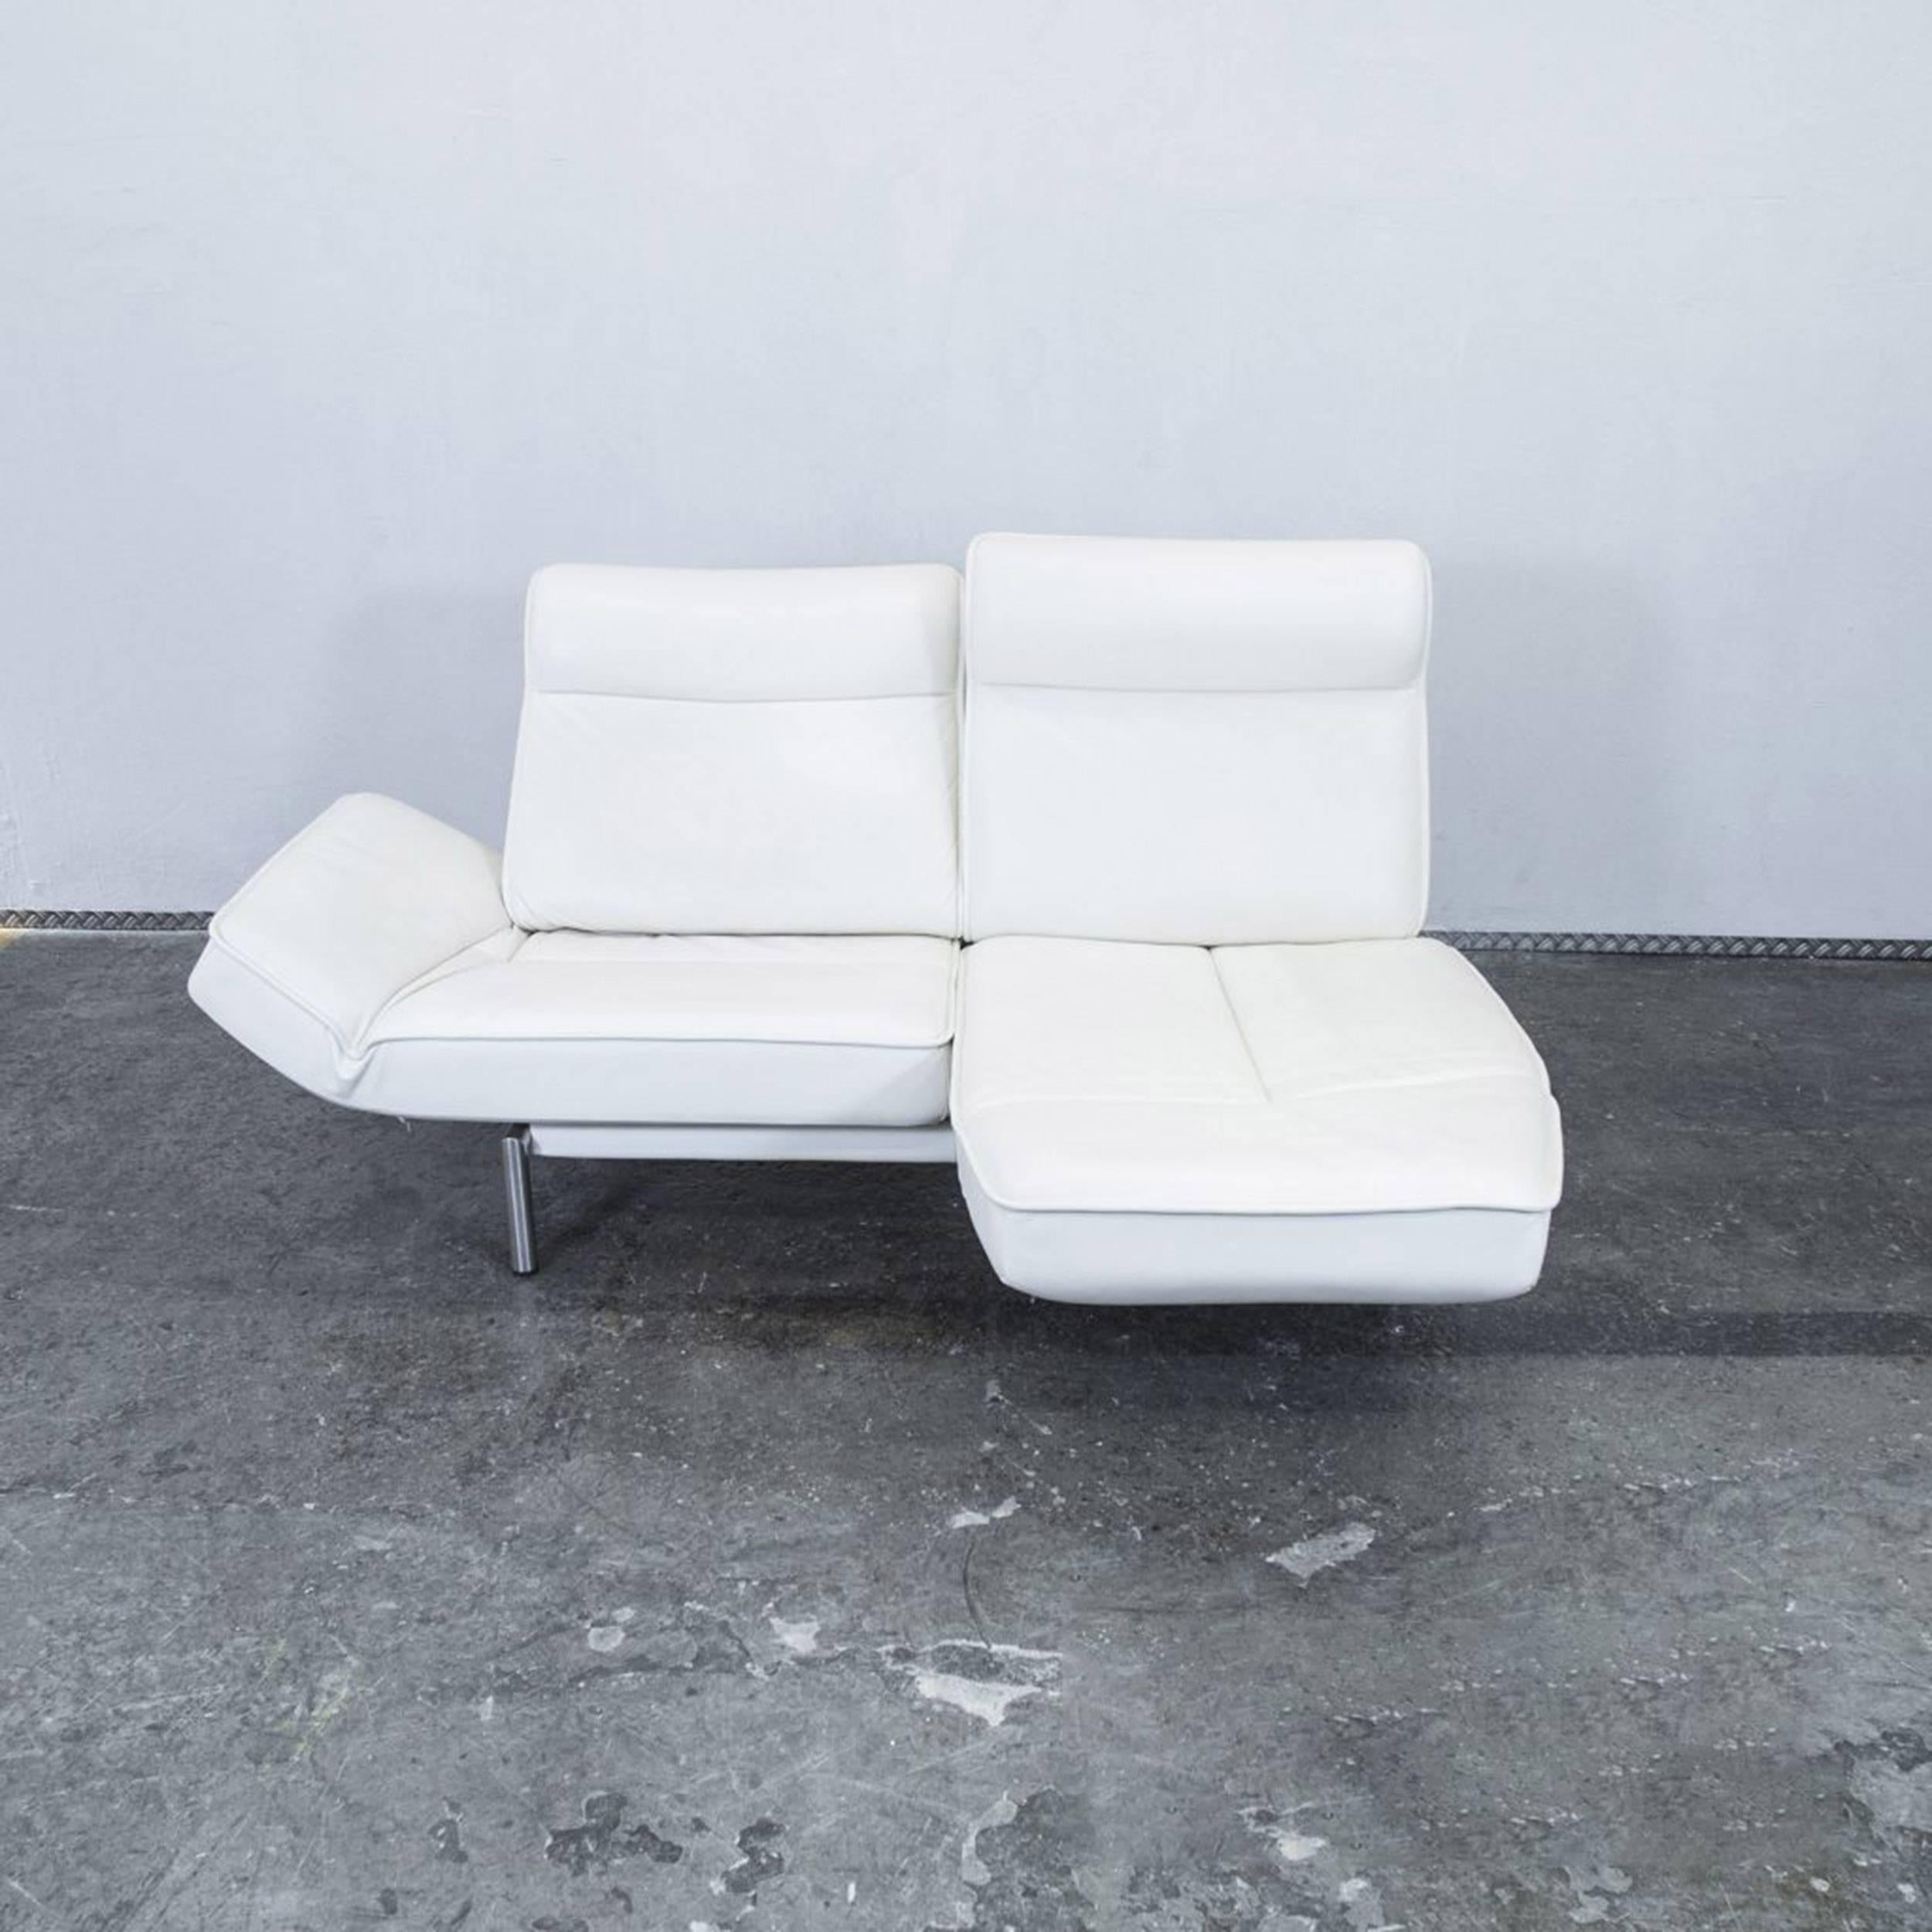 De Sede DS 450 Designer Leather Sofa White Two-Seat Function Modern 2